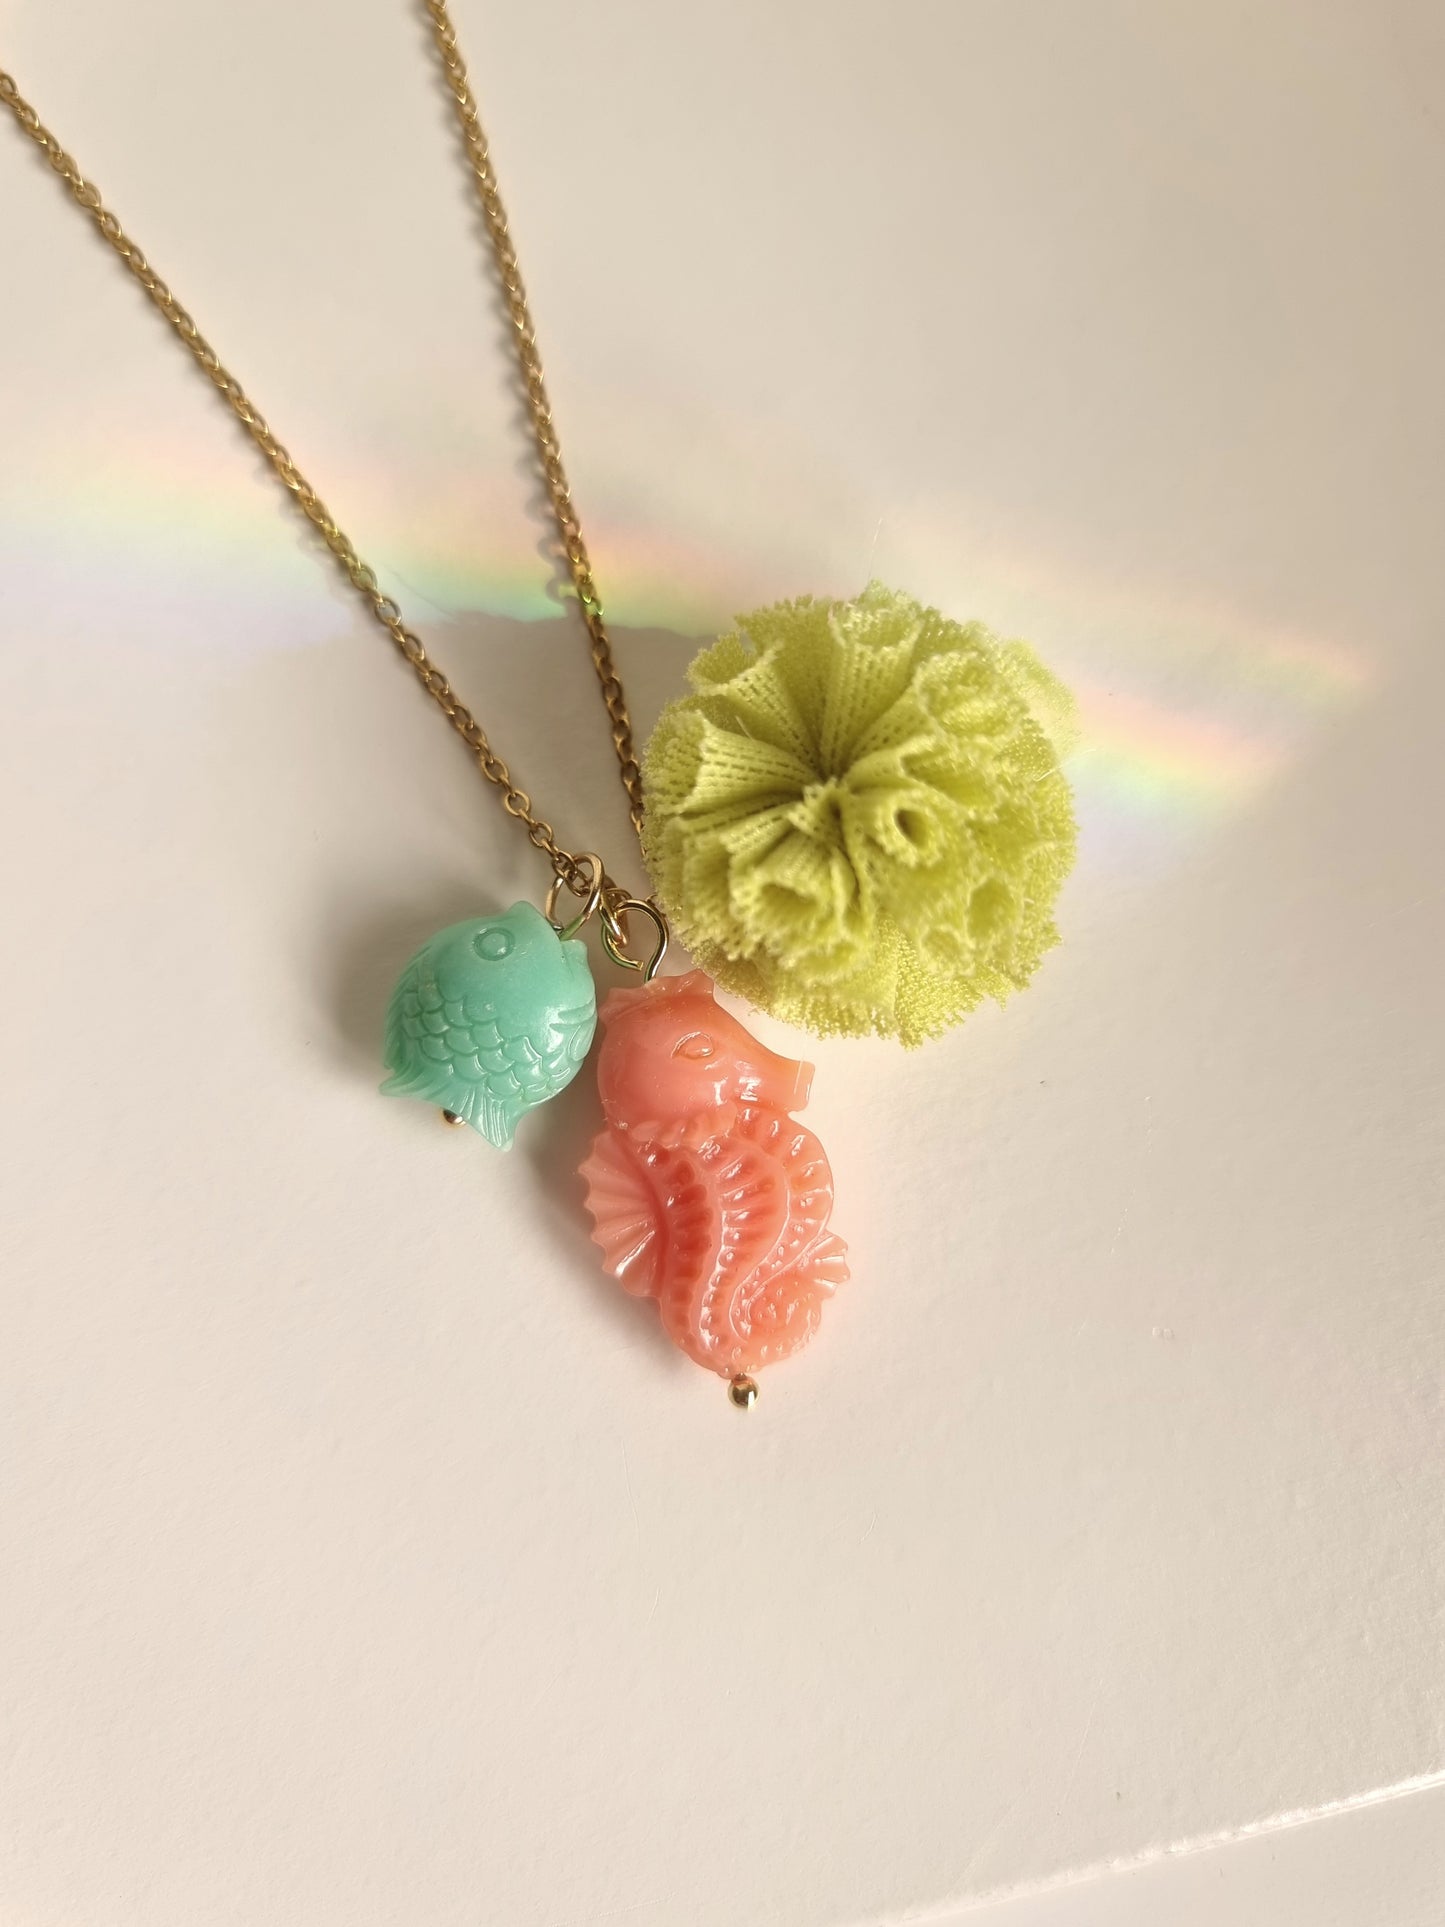 Meri! Seahorse charm necklace with green pompom